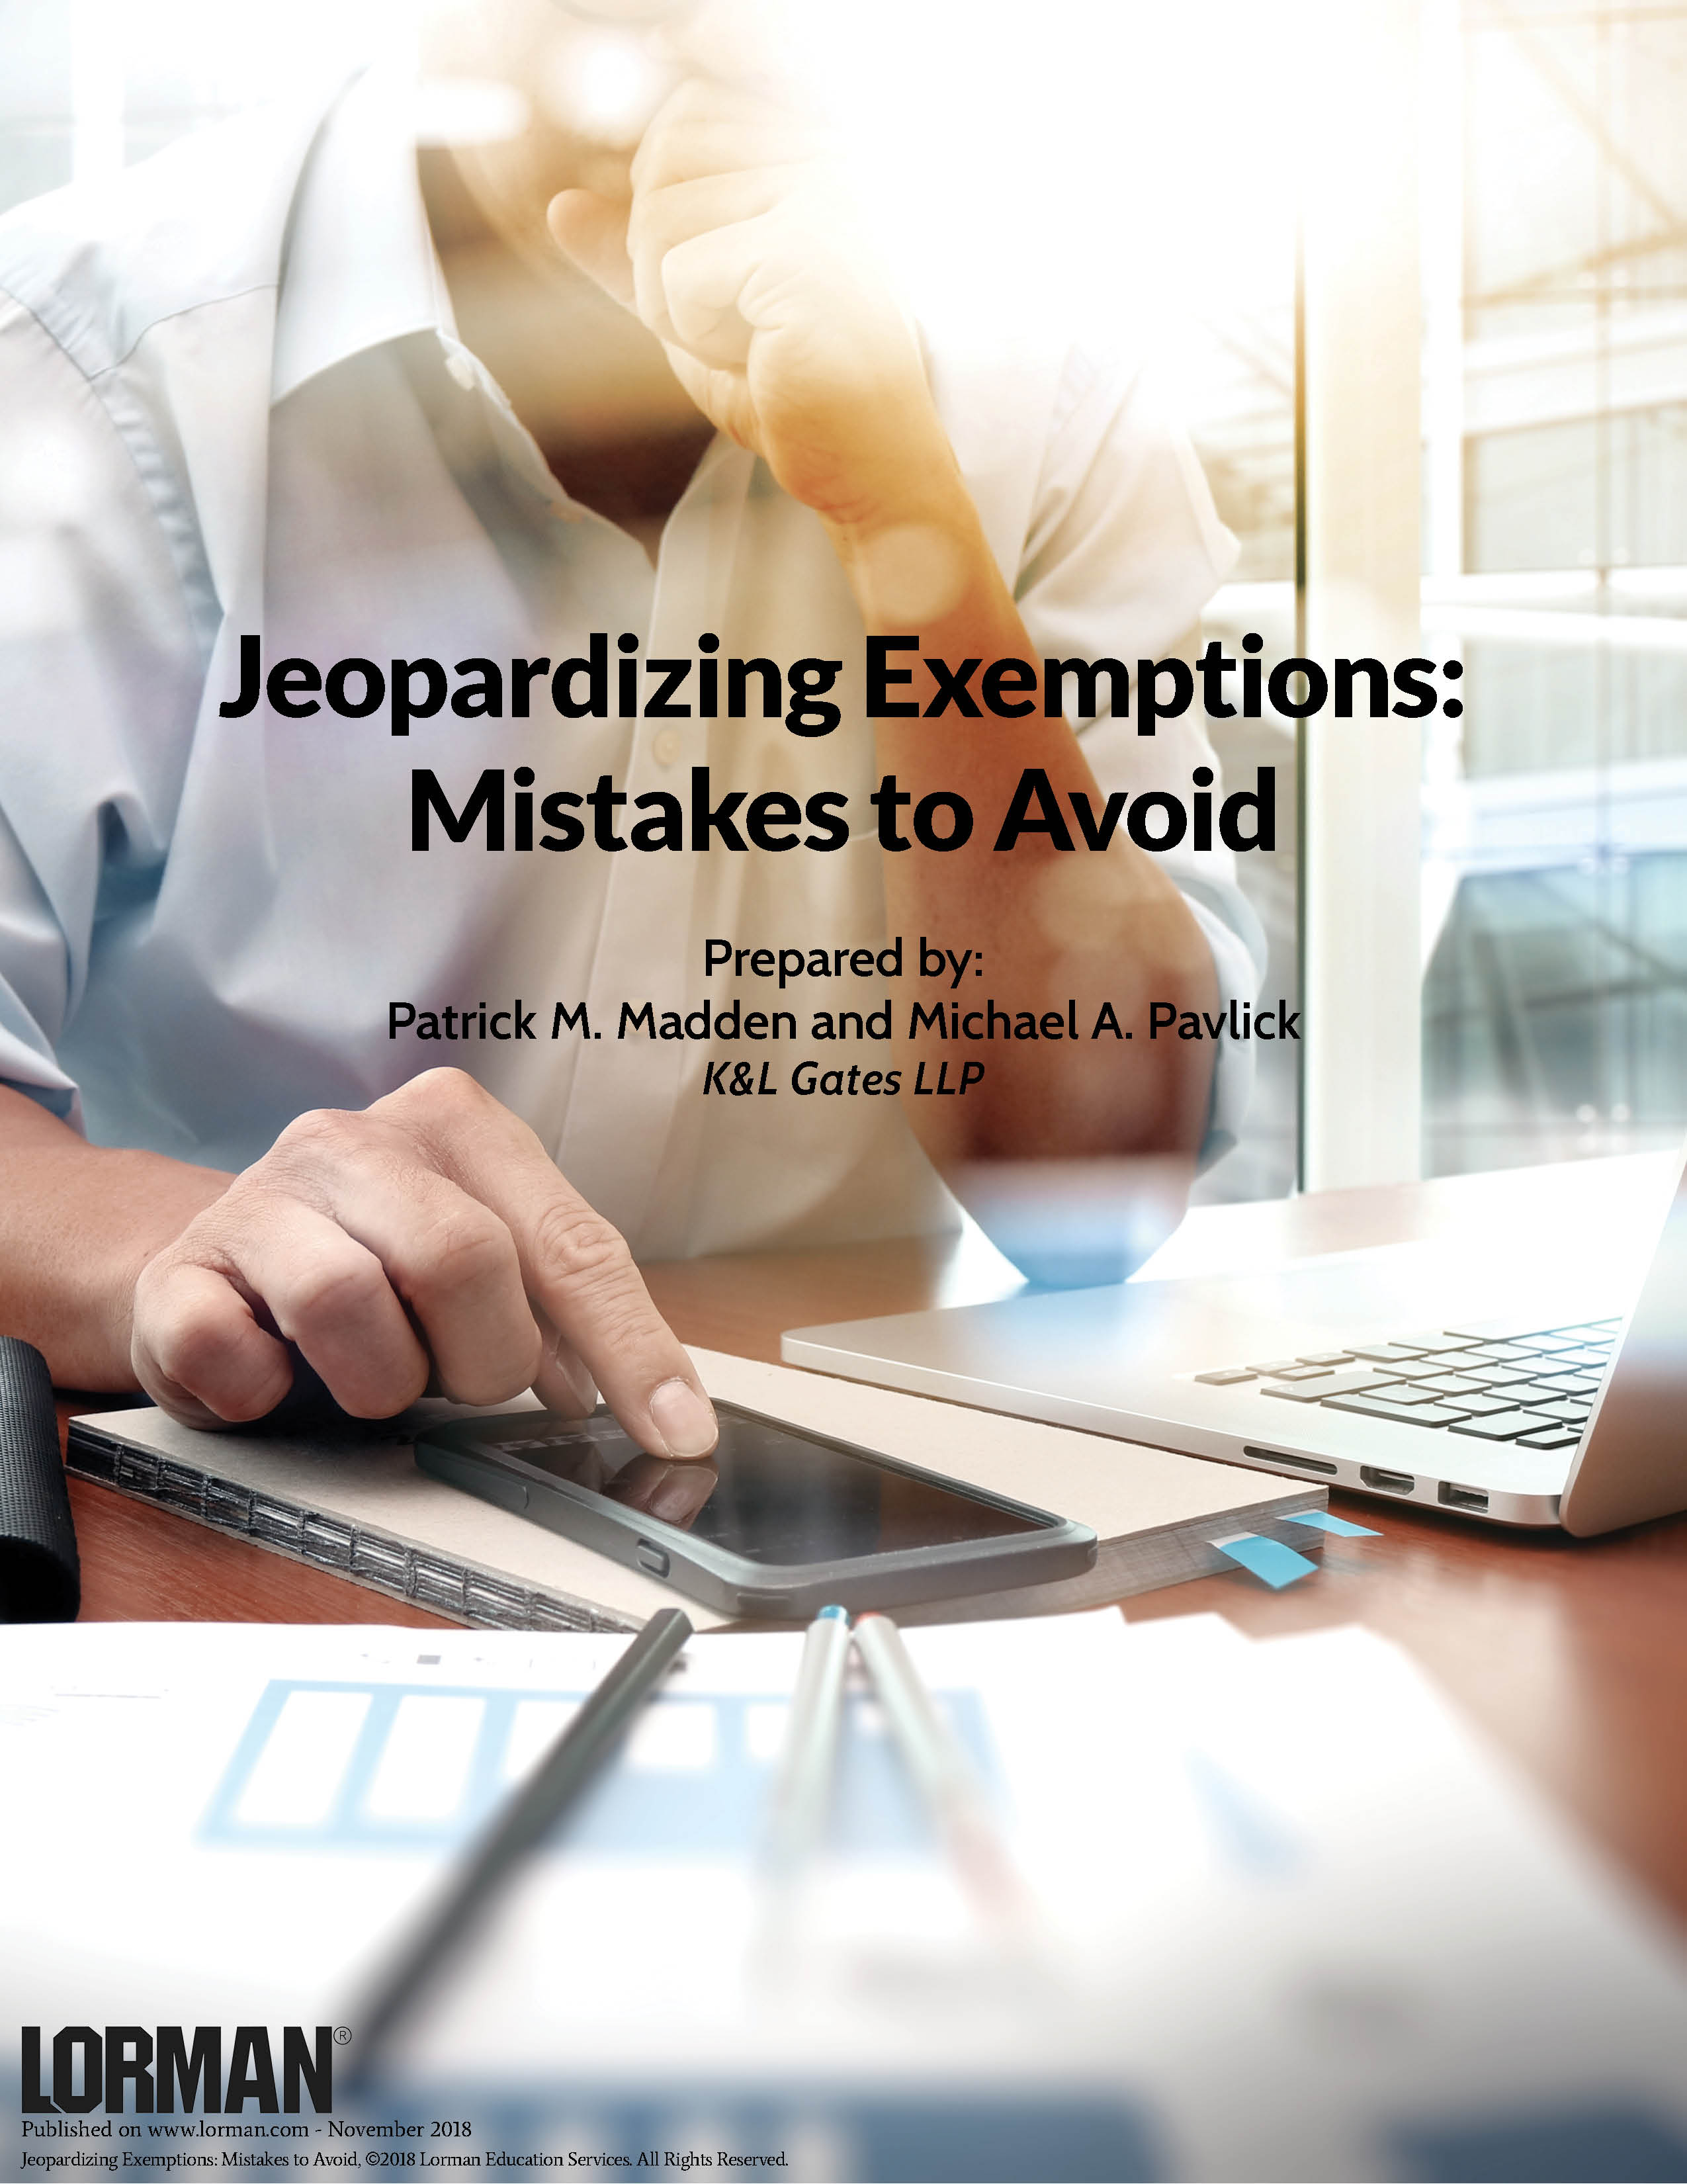 Jeopardizing Exemptions: Mistakes to Avoid